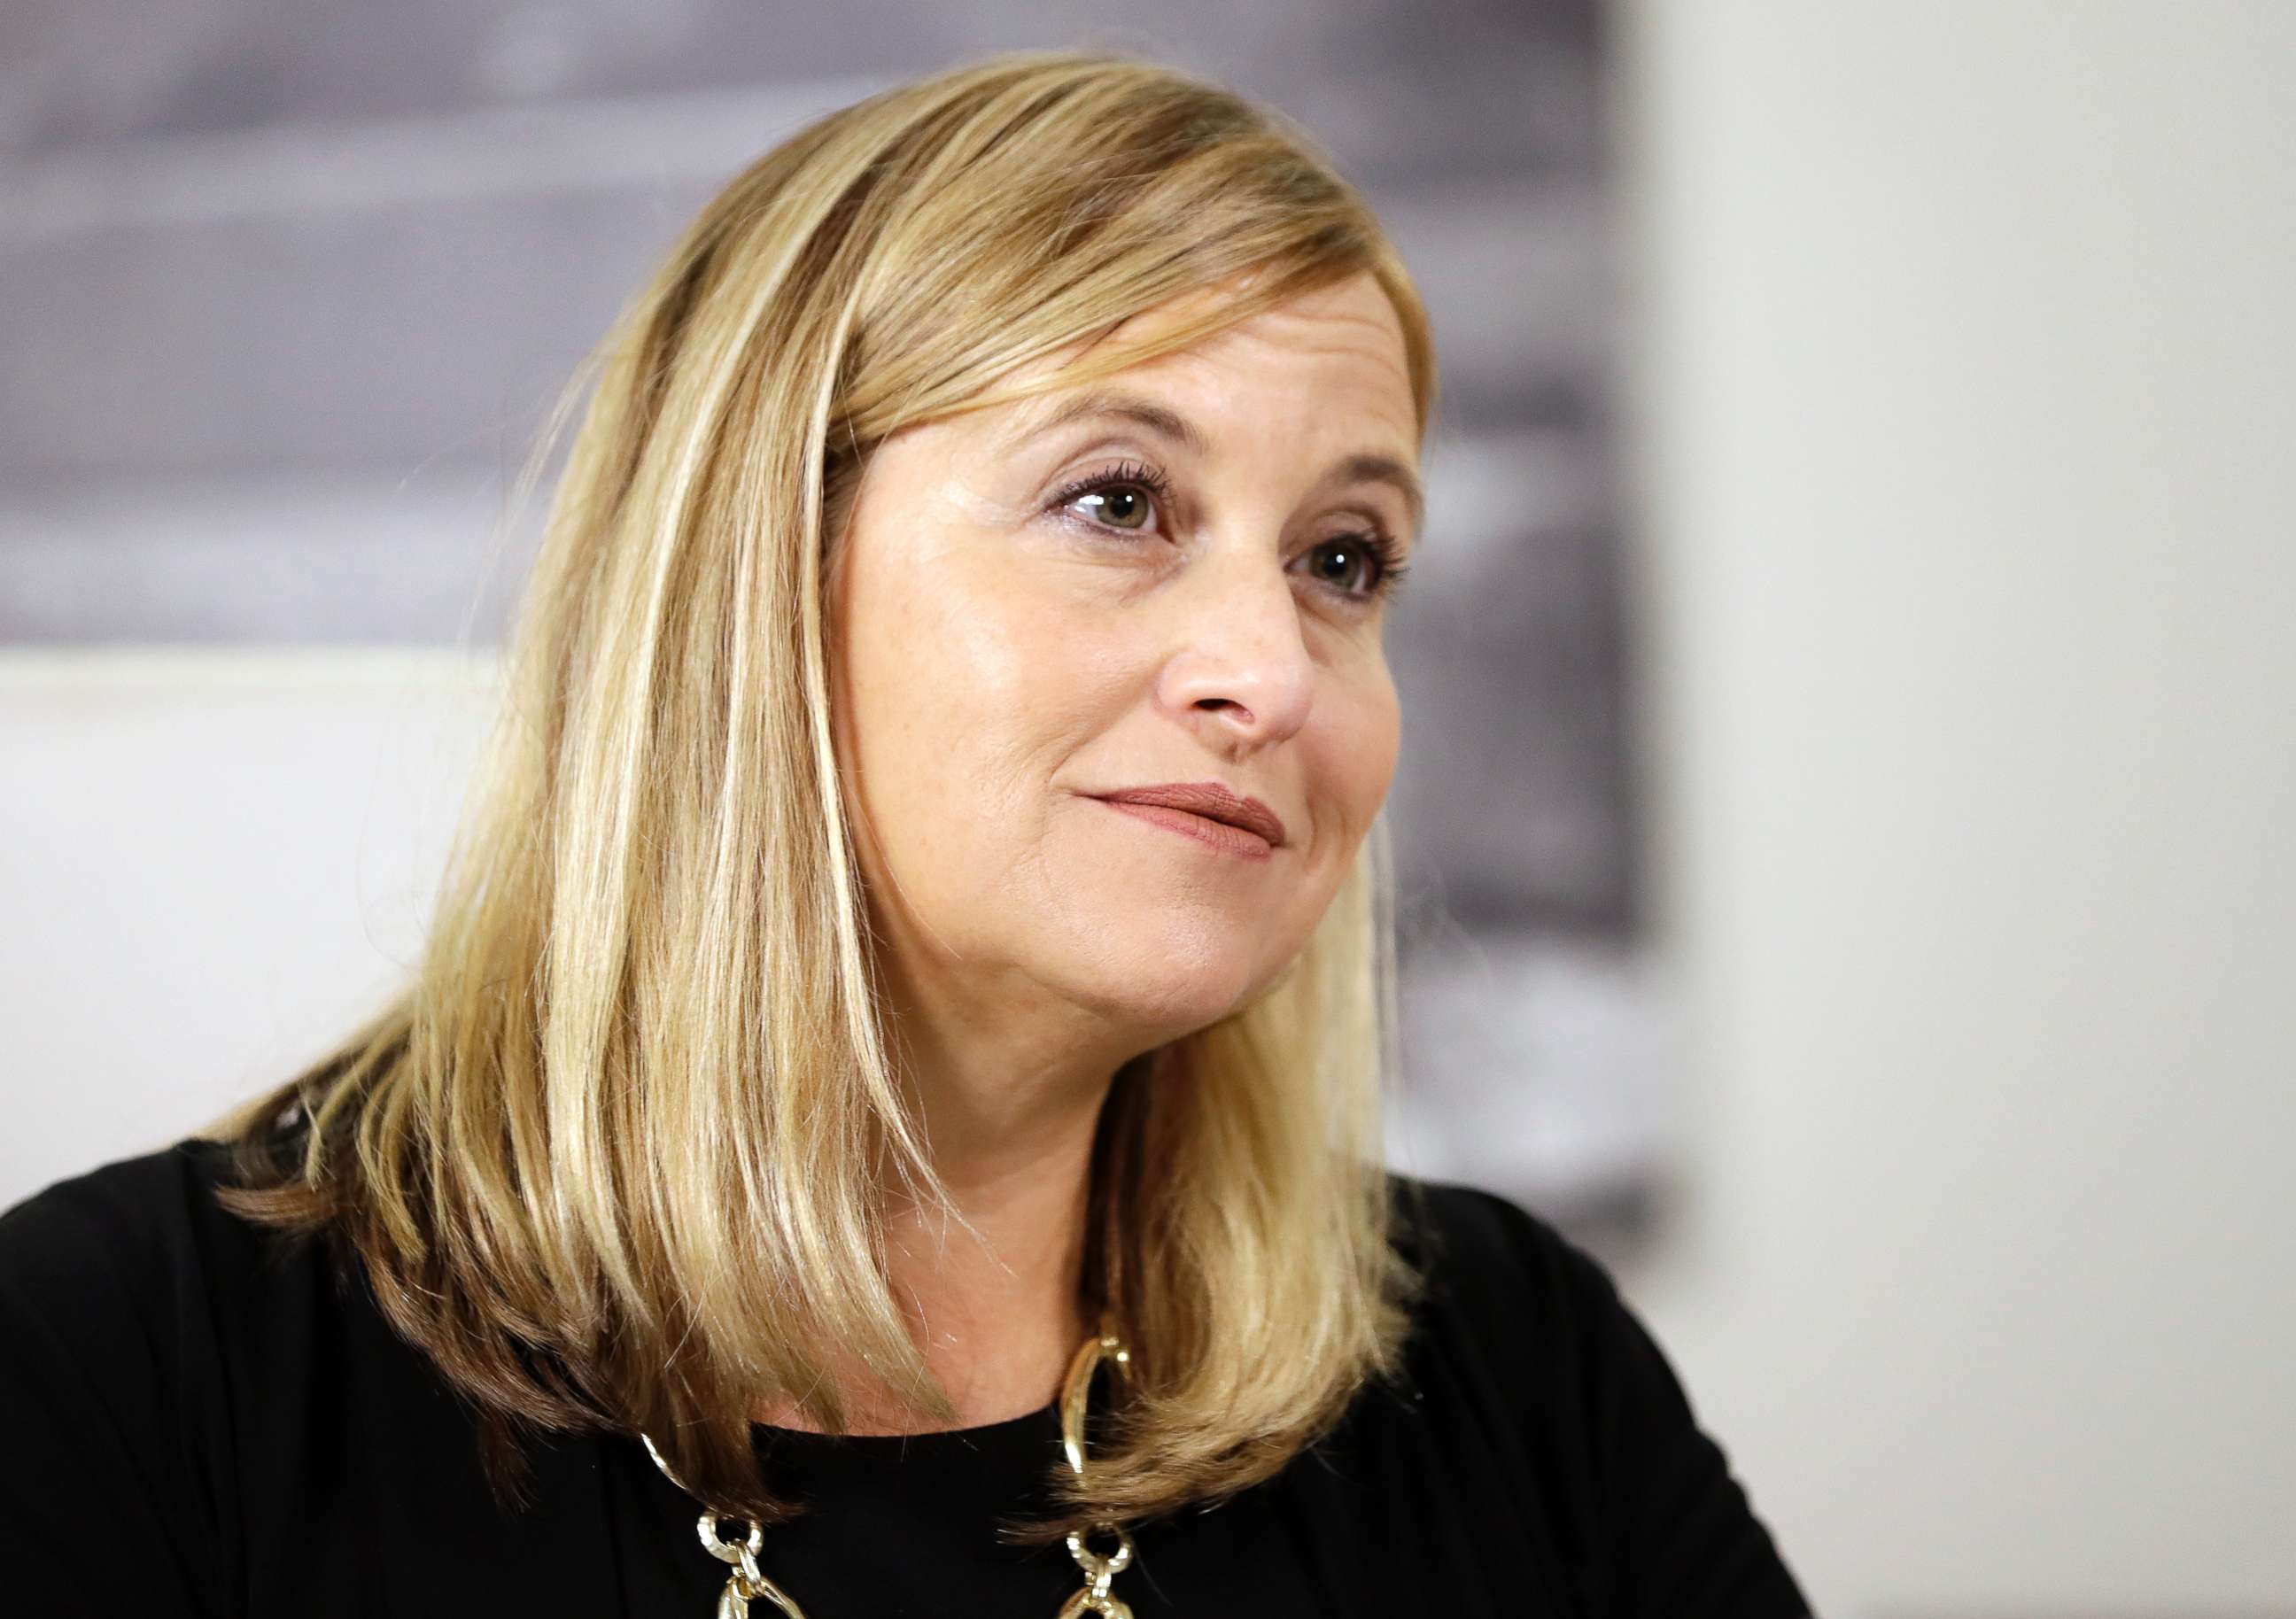 PHOTO: Nashville Mayor Megan Barry listens to a question during a news conference in her office on Aug. 7, 2017, in Nashville, Tenn.